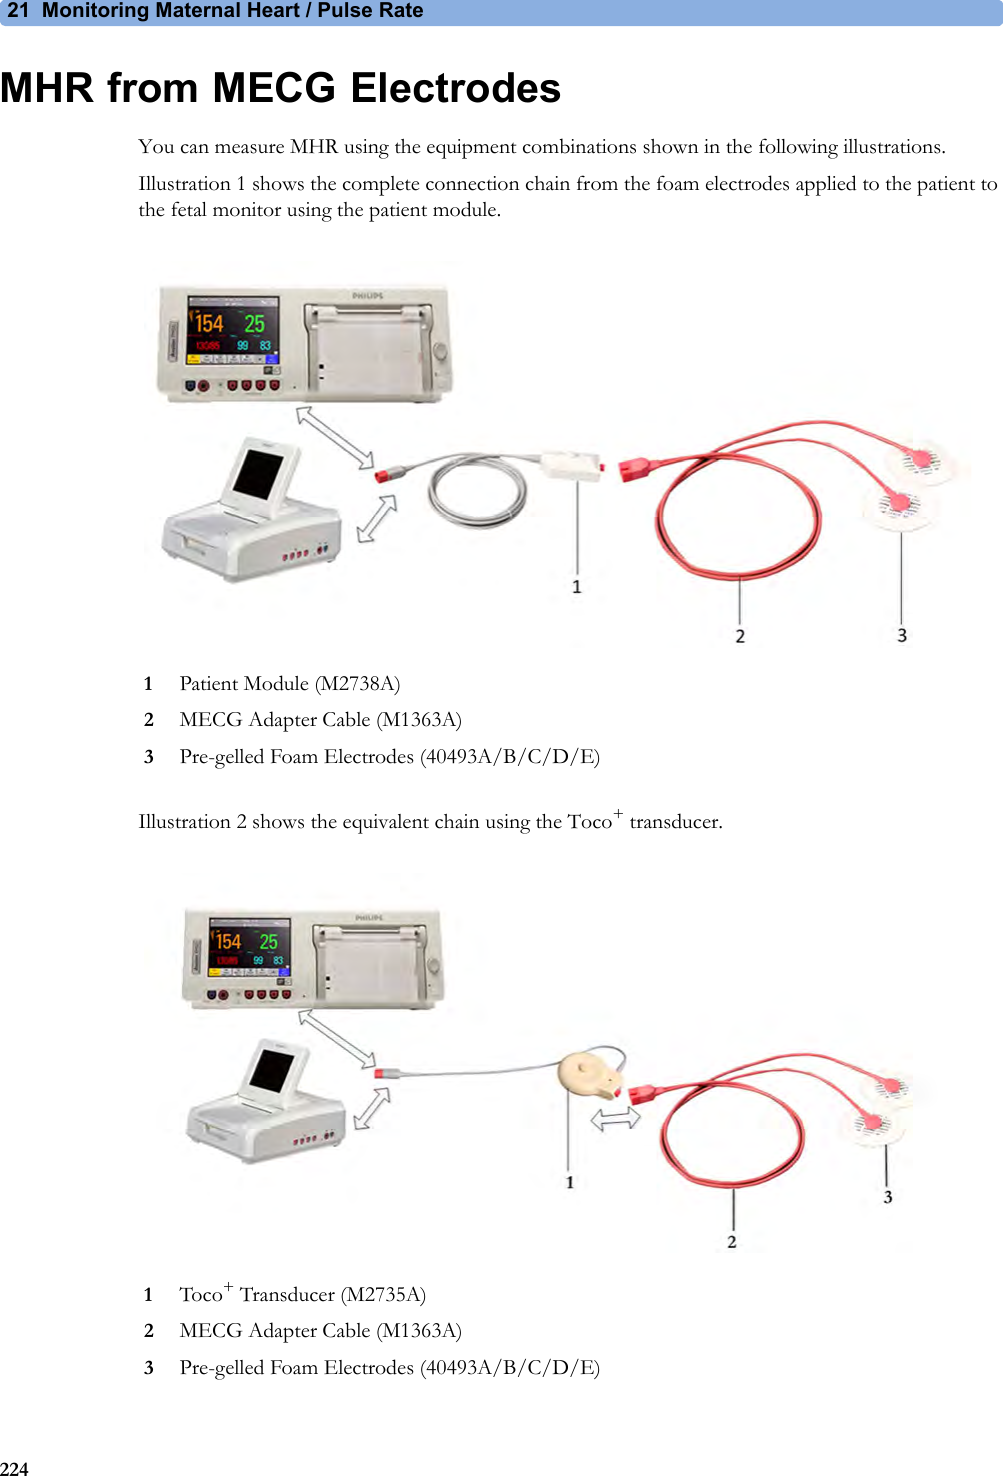 21 Monitoring Maternal Heart / Pulse Rate224MHR from MECG ElectrodesYou can measure MHR using the equipment combinations shown in the following illustrations.Illustration 1 shows the complete connection chain from the foam electrodes applied to the patient to the fetal monitor using the patient module.Illustration 2 shows the equivalent chain using the Toco+ transducer.1Patient Module (M2738A)2MECG Adapter Cable (M1363A)3Pre-gelled Foam Electrodes (40493A/B/C/D/E)1Toco+ Transducer (M2735A)2MECG Adapter Cable (M1363A)3Pre-gelled Foam Electrodes (40493A/B/C/D/E)